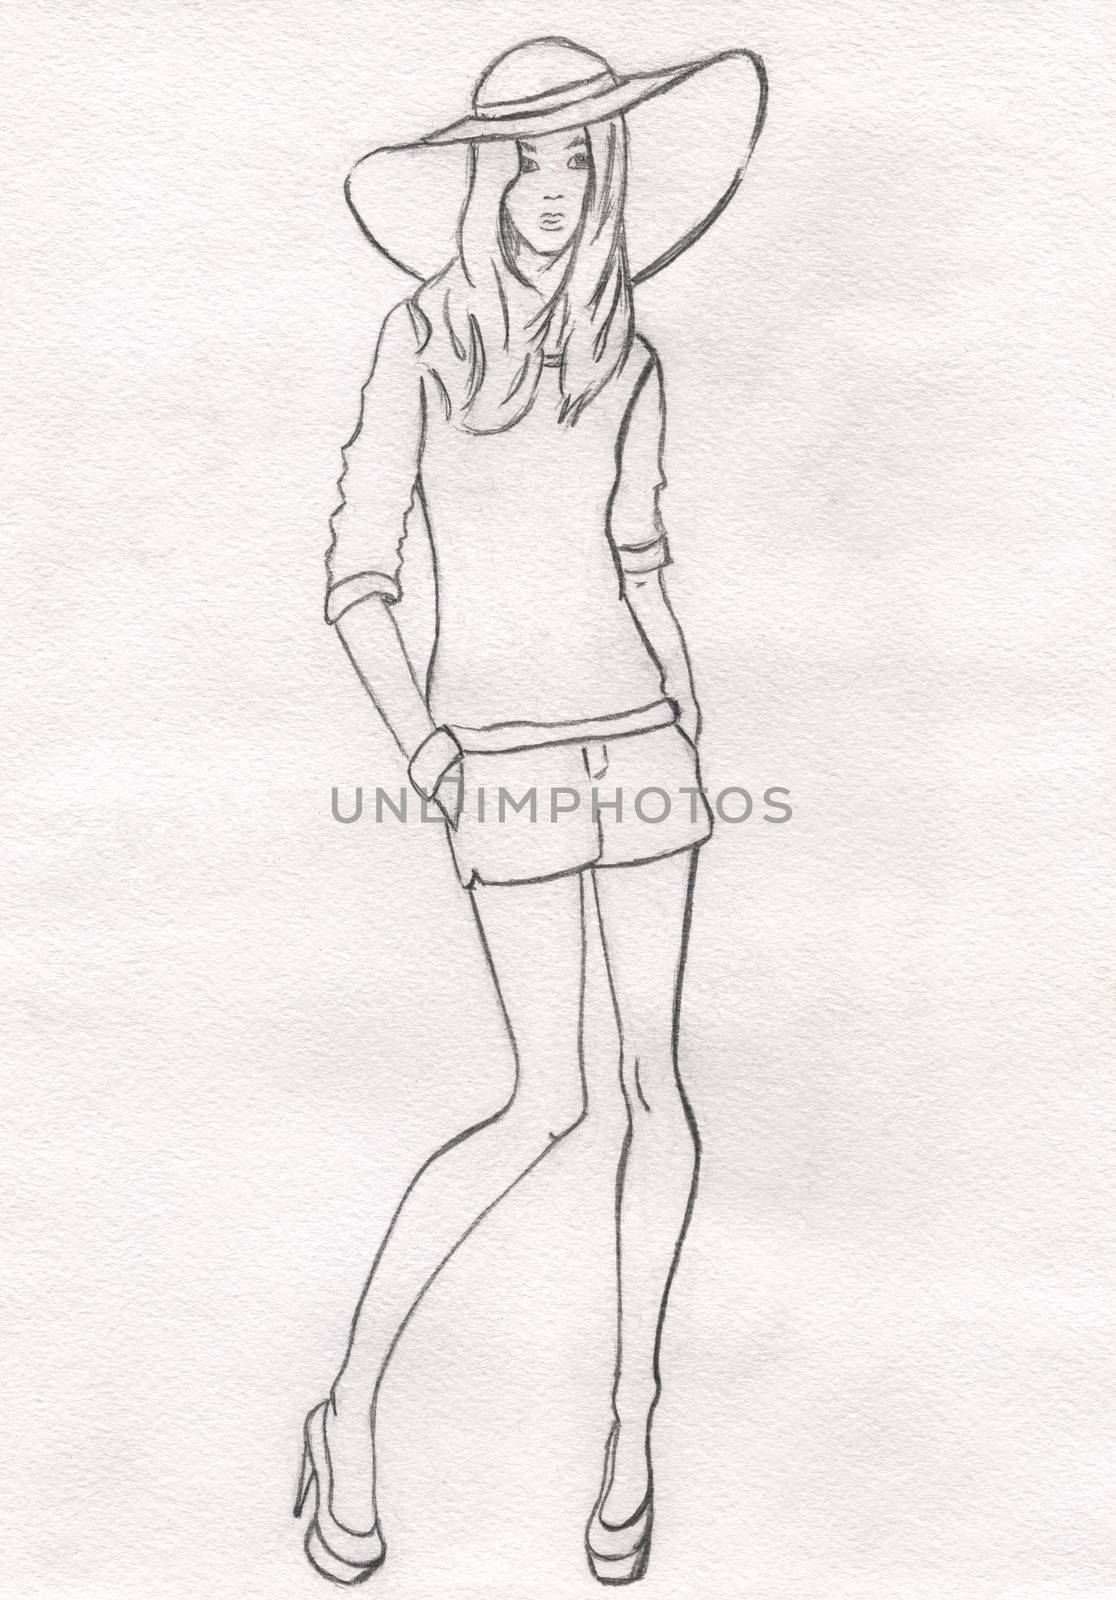 The pencil sketch of fashion model in a hat and shorts